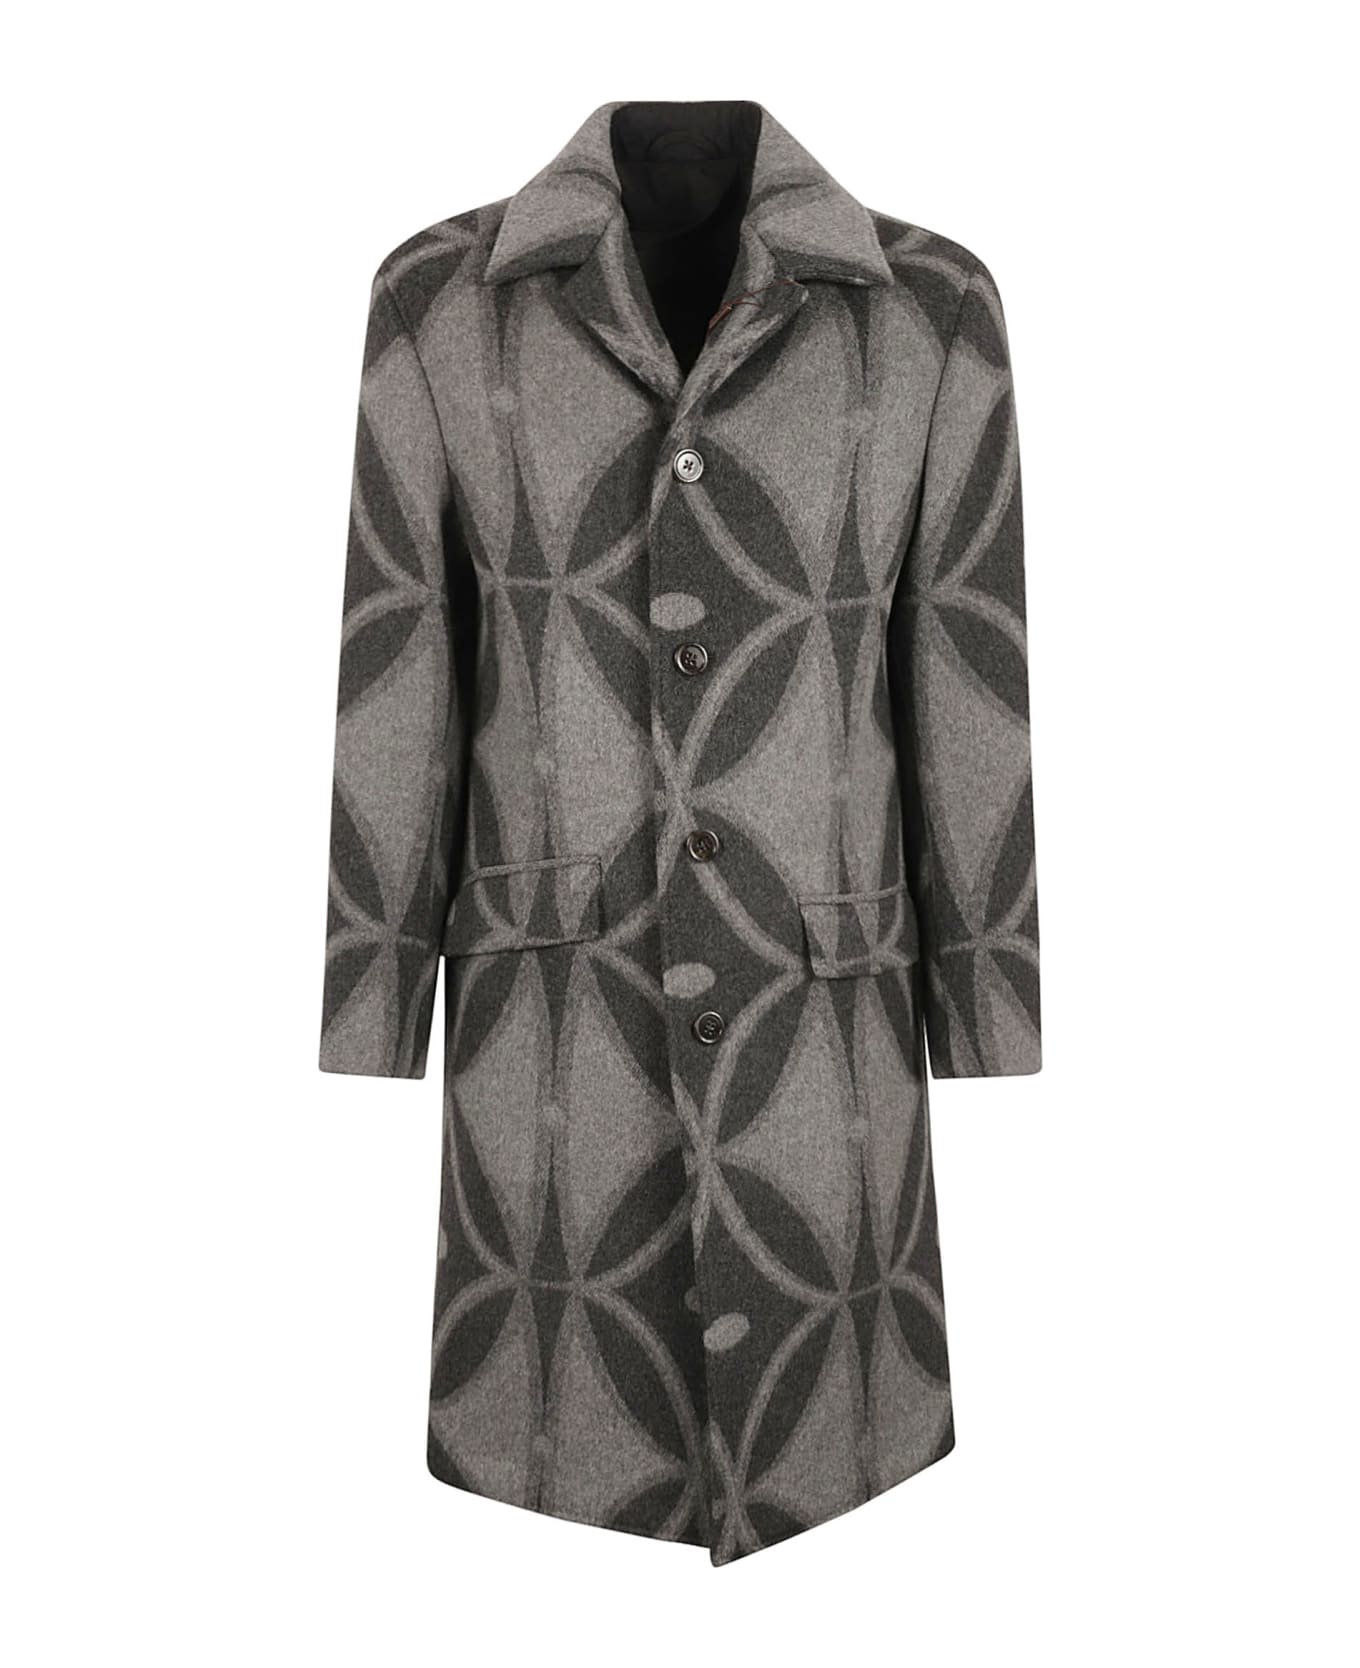 Etro Patterned Button-up Coat - Grey コート